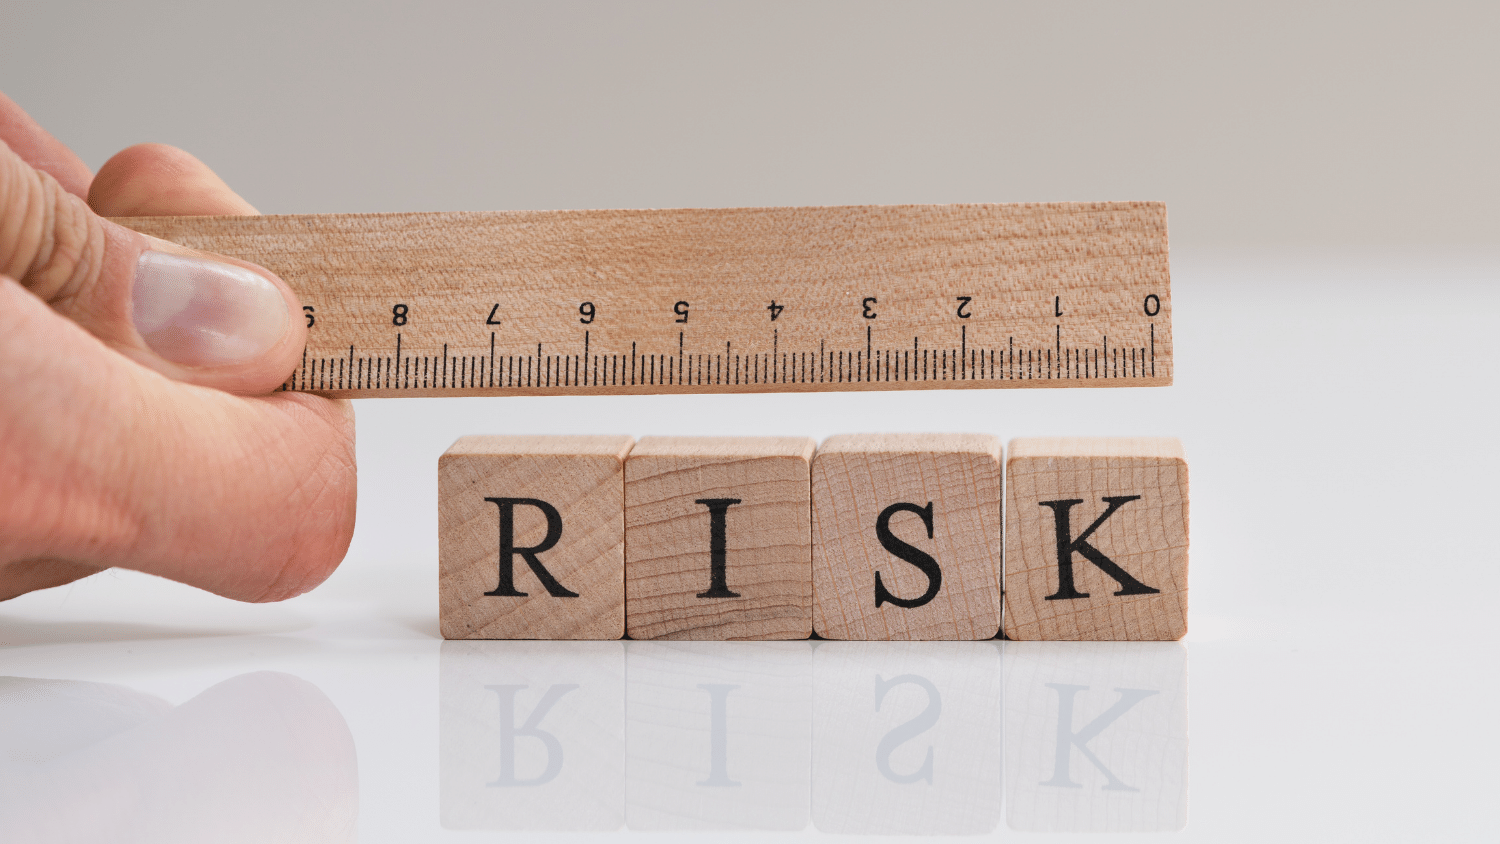 A hand holding a ruler over wooden blocks spelling the word "risk."